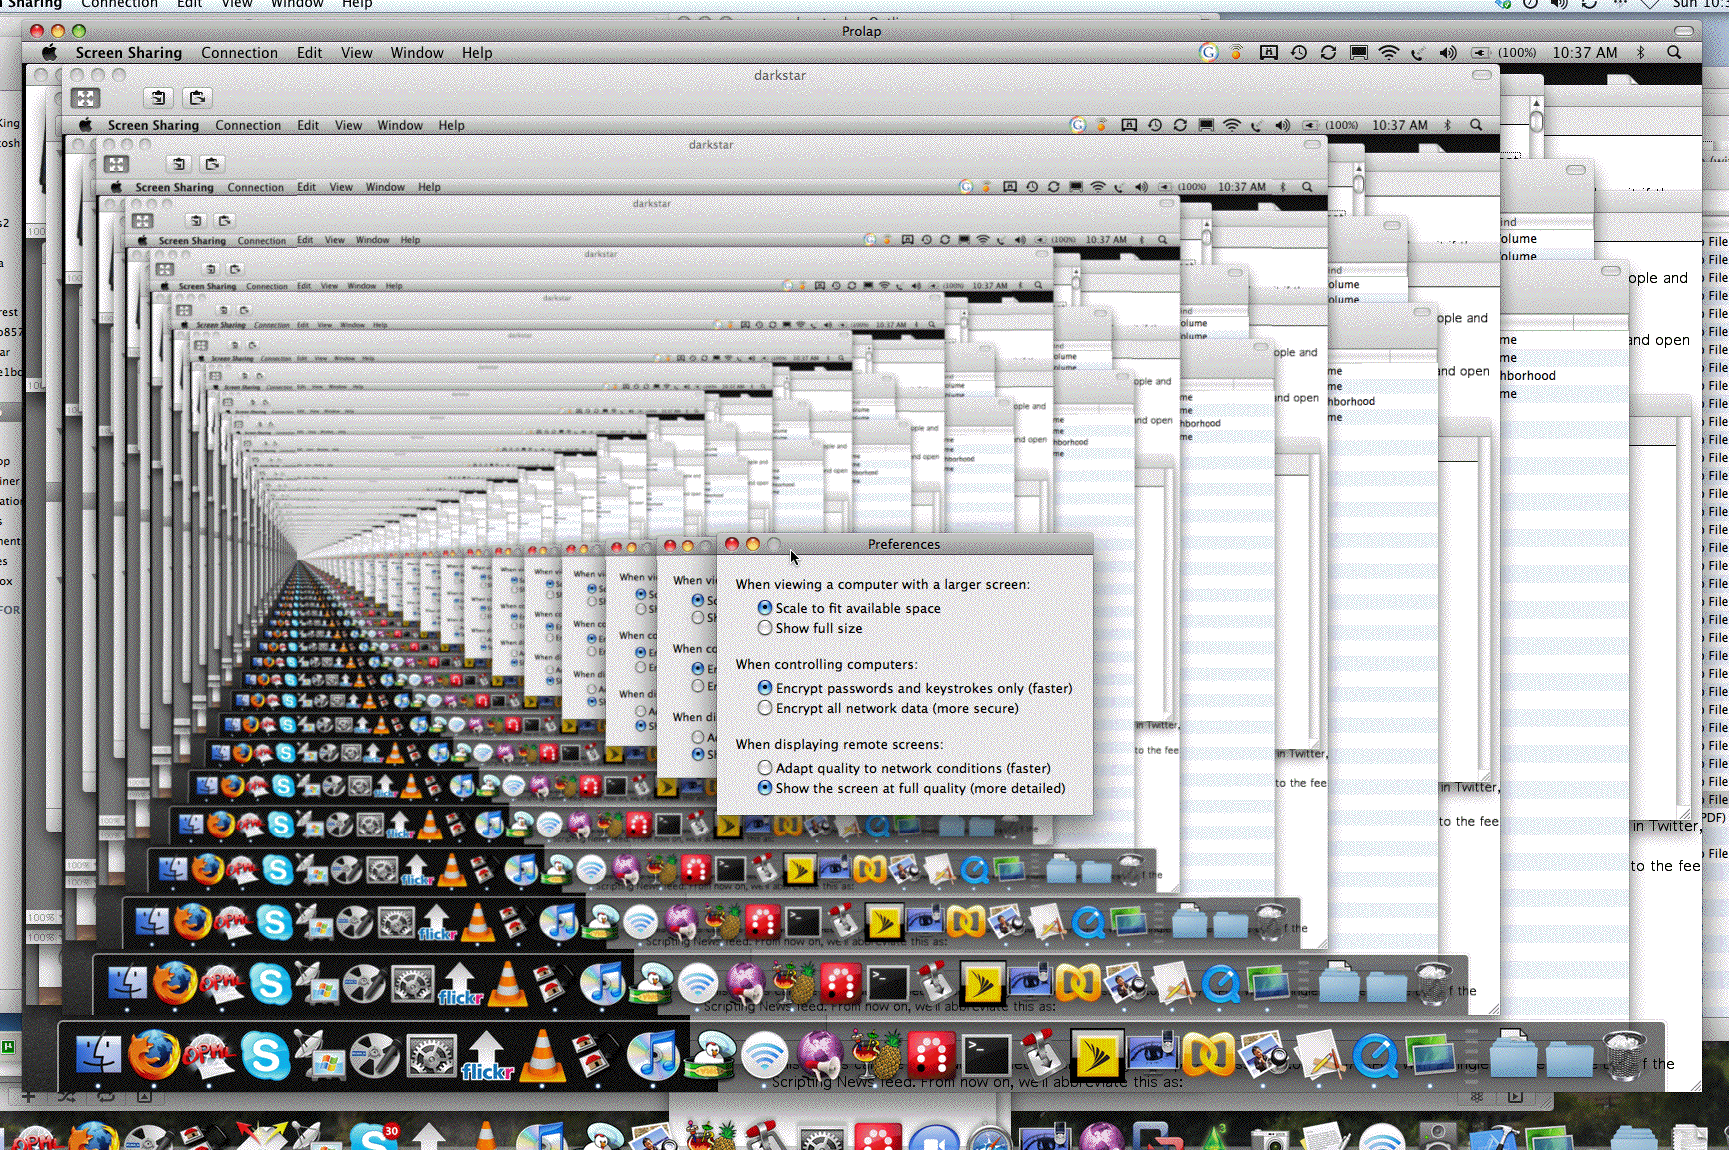 What happens when you screen share on a computer that's already sharing your screen